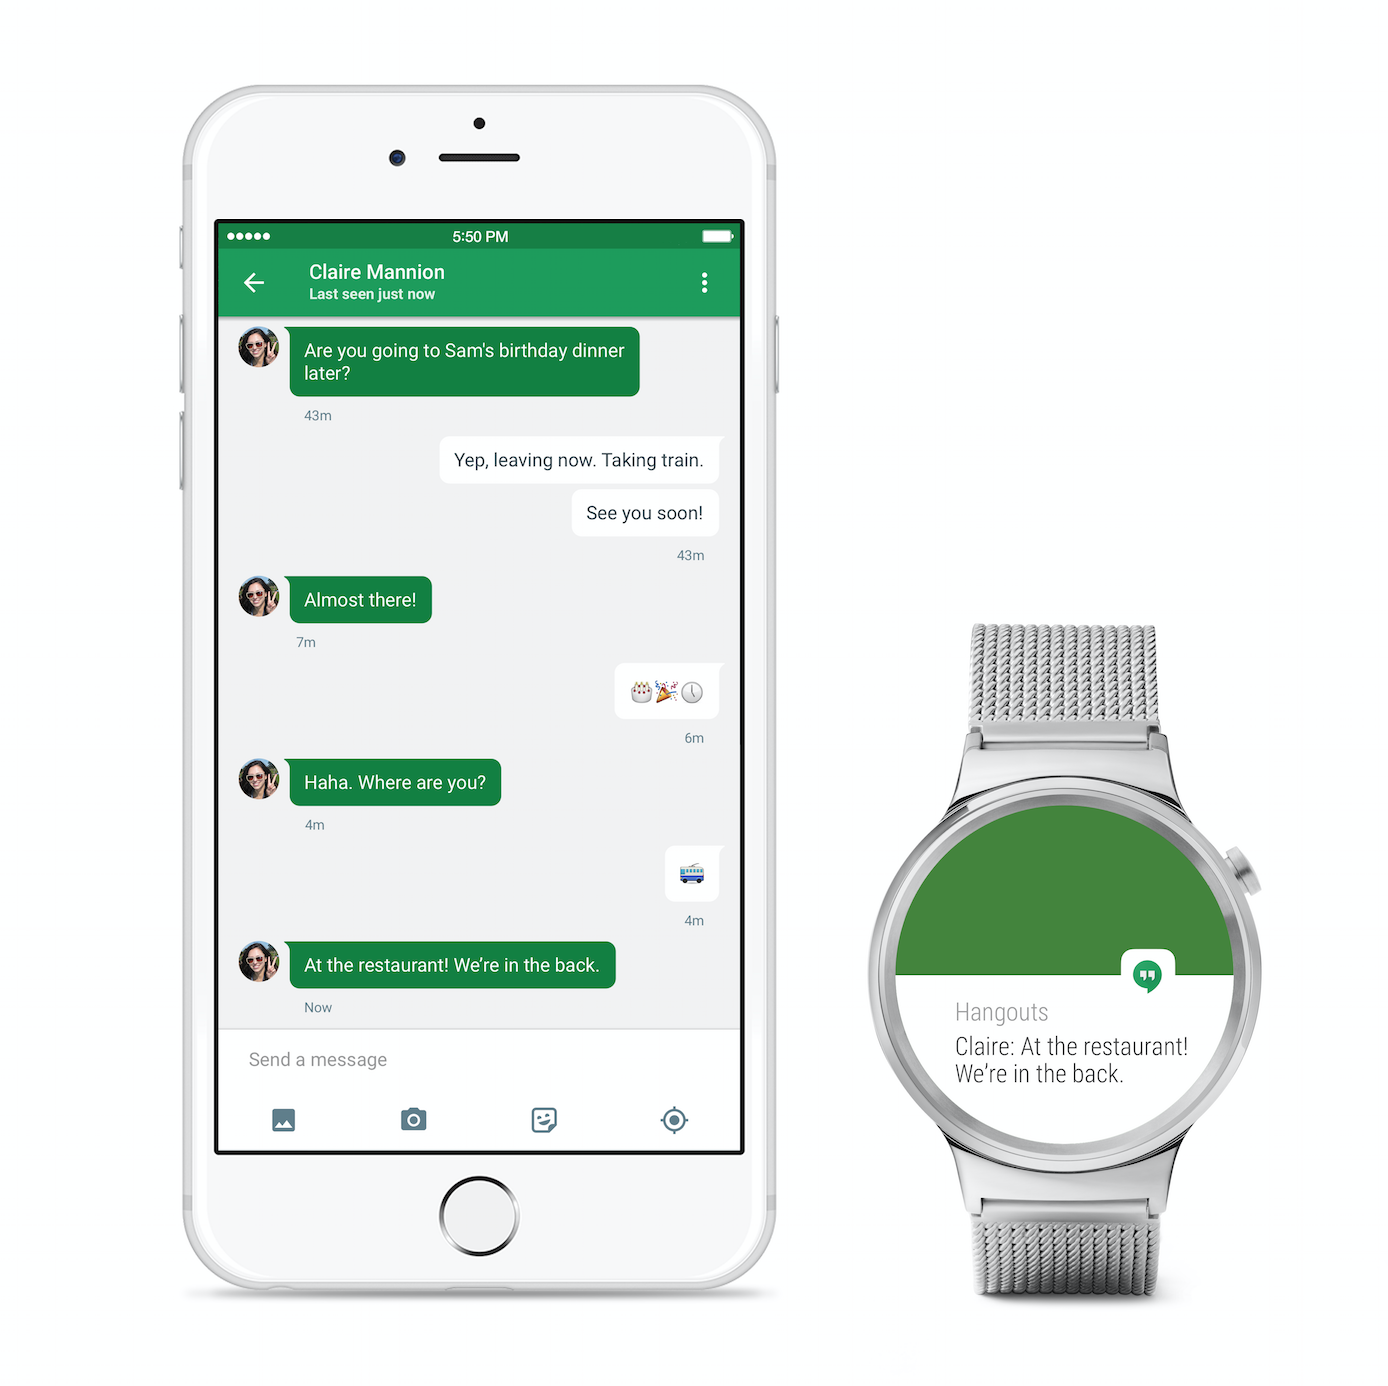 Android Wear now works with Apple iPhones